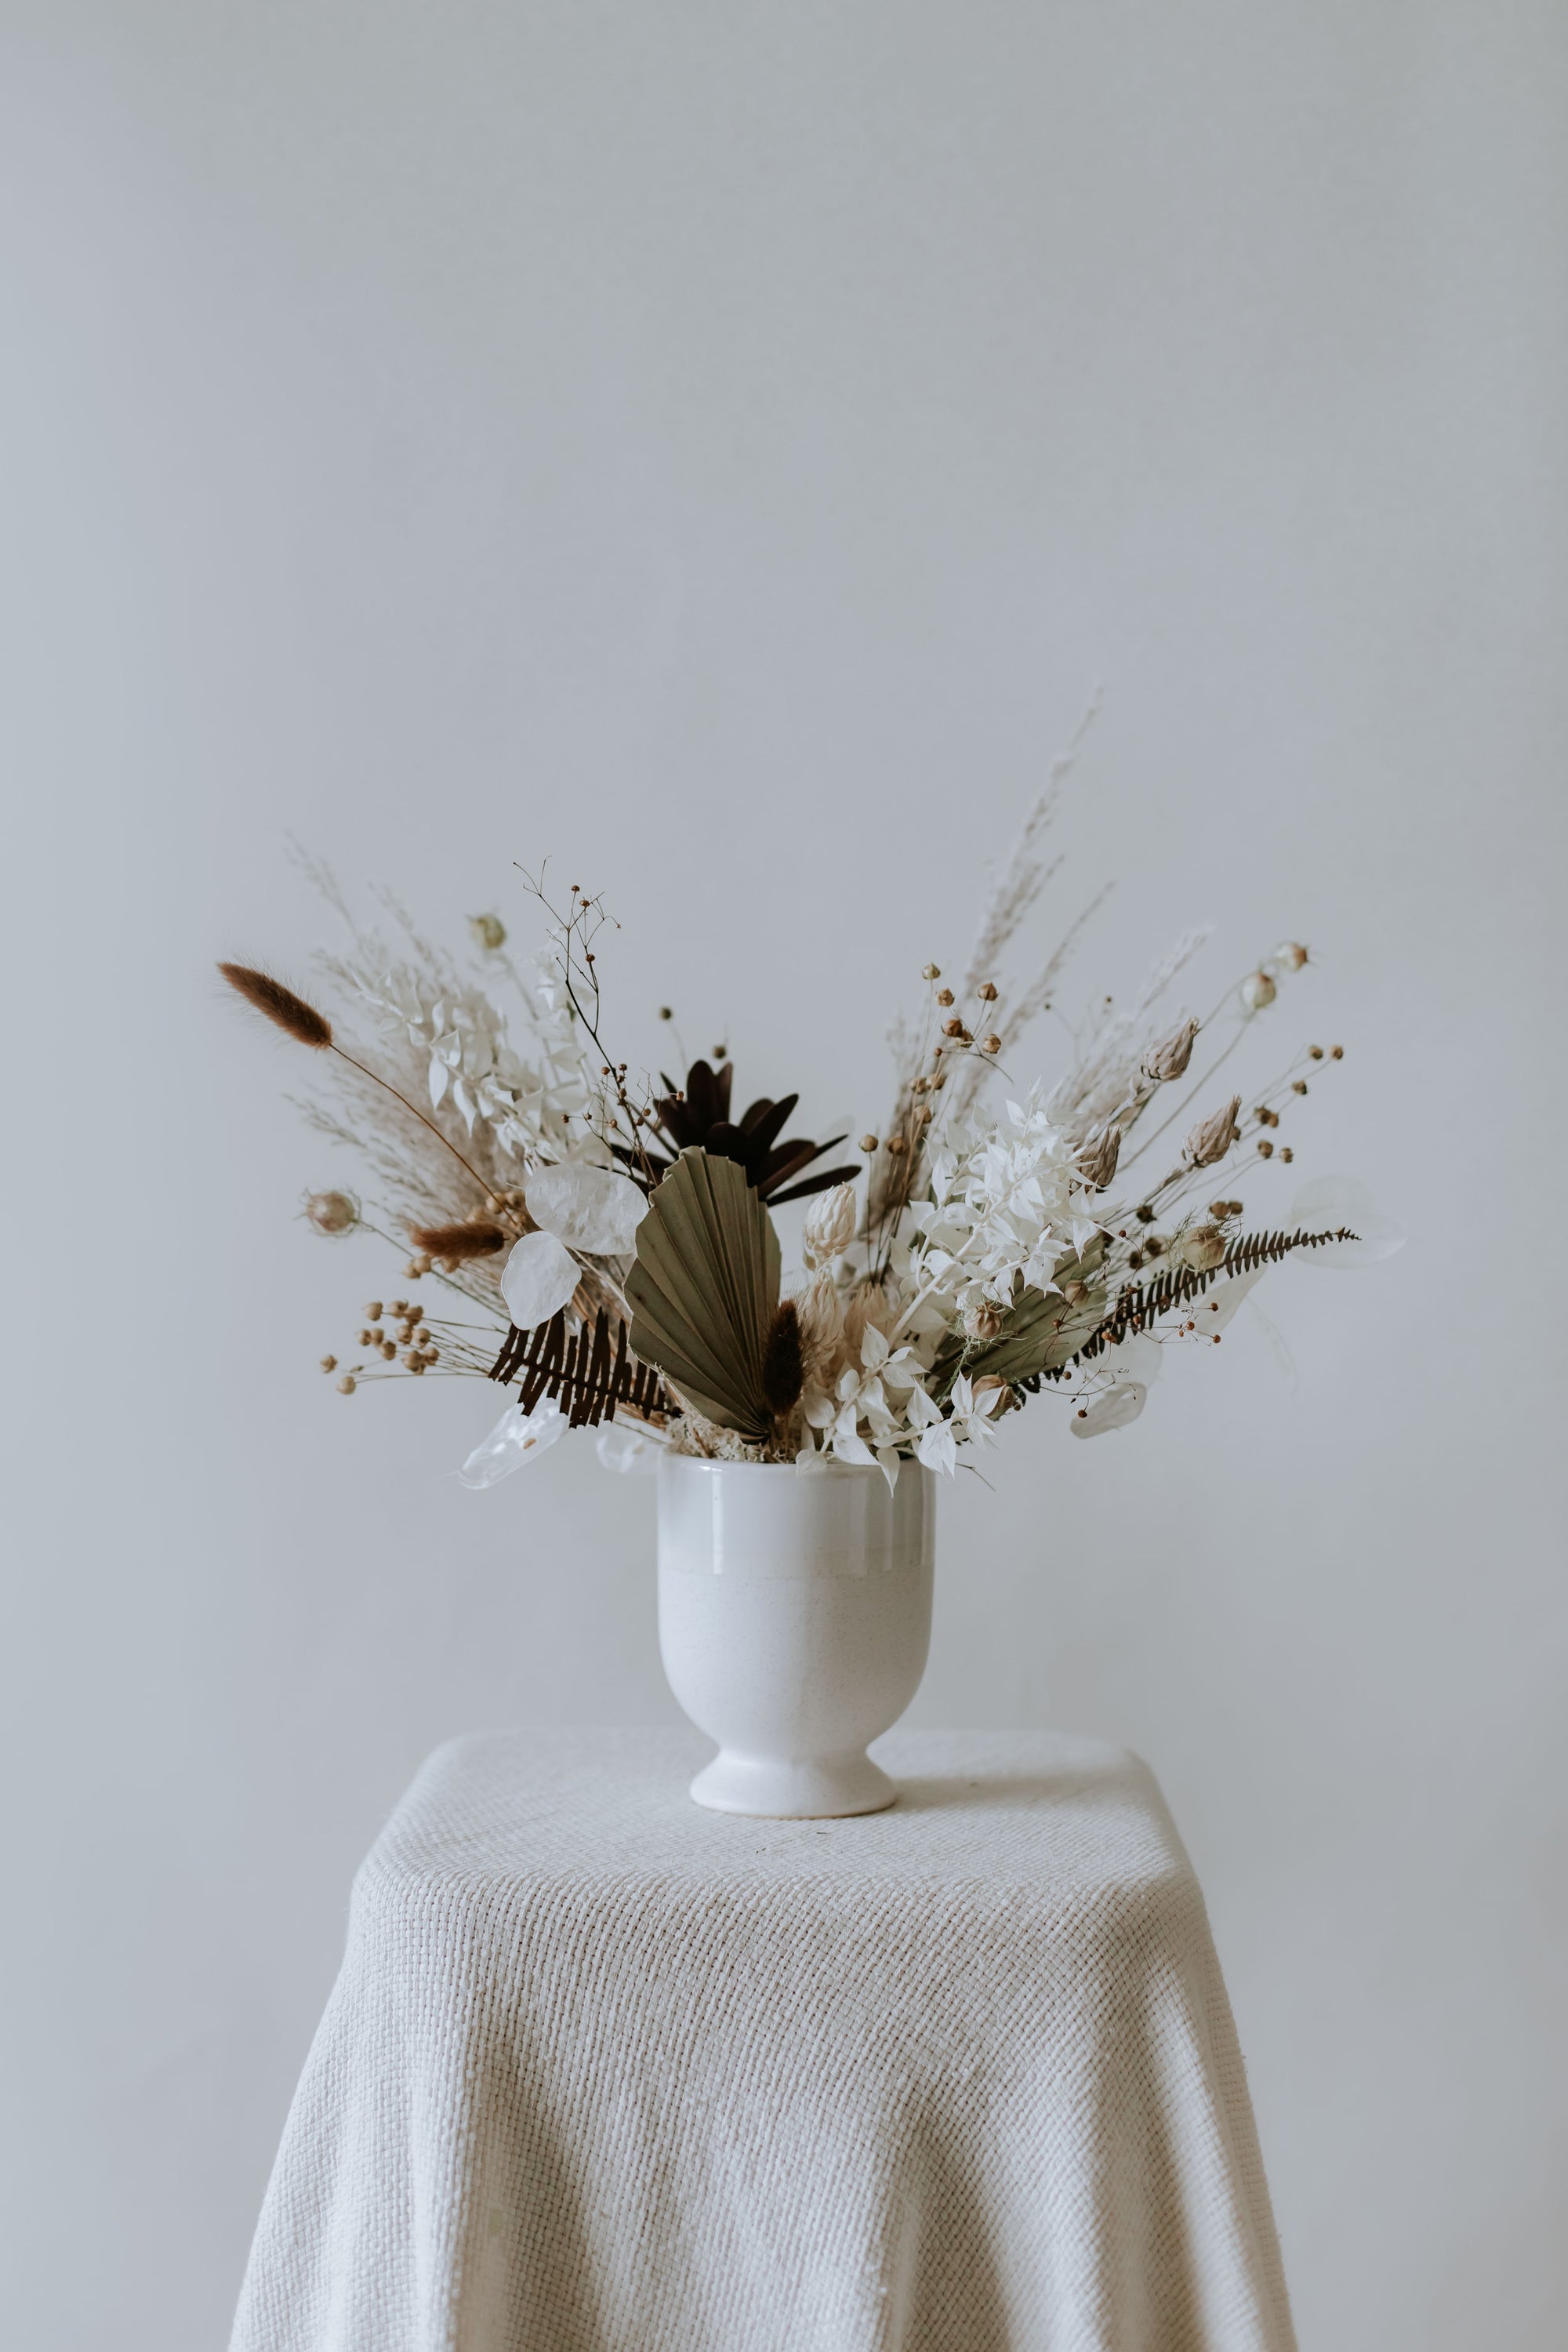 Small Everlasting Arrangement in Vintage - Timeless dried flowers in nostalgic hues presented in a doll white porcelain vase.